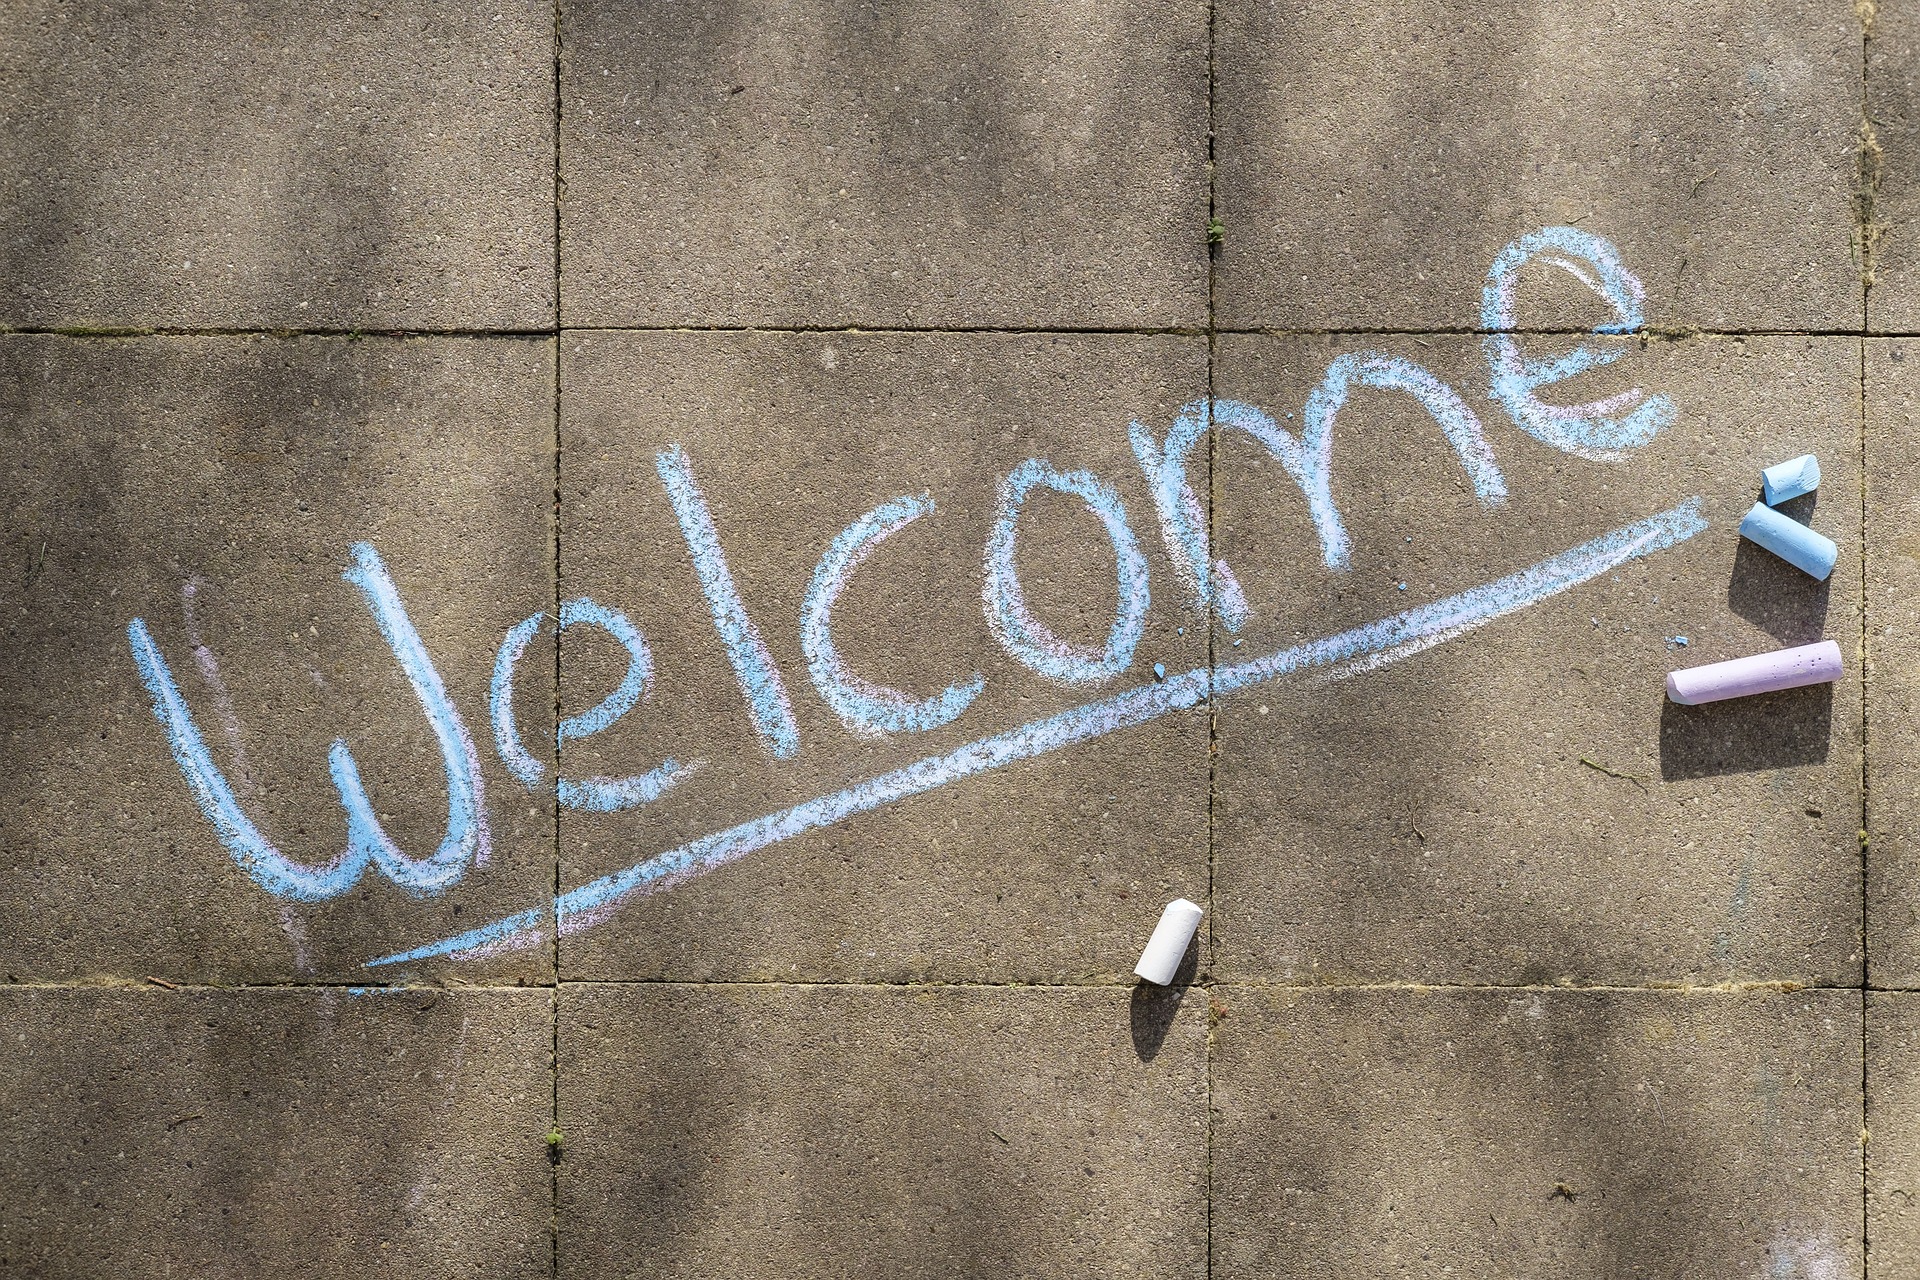 The word 'welcome' written in chalk on the pavement